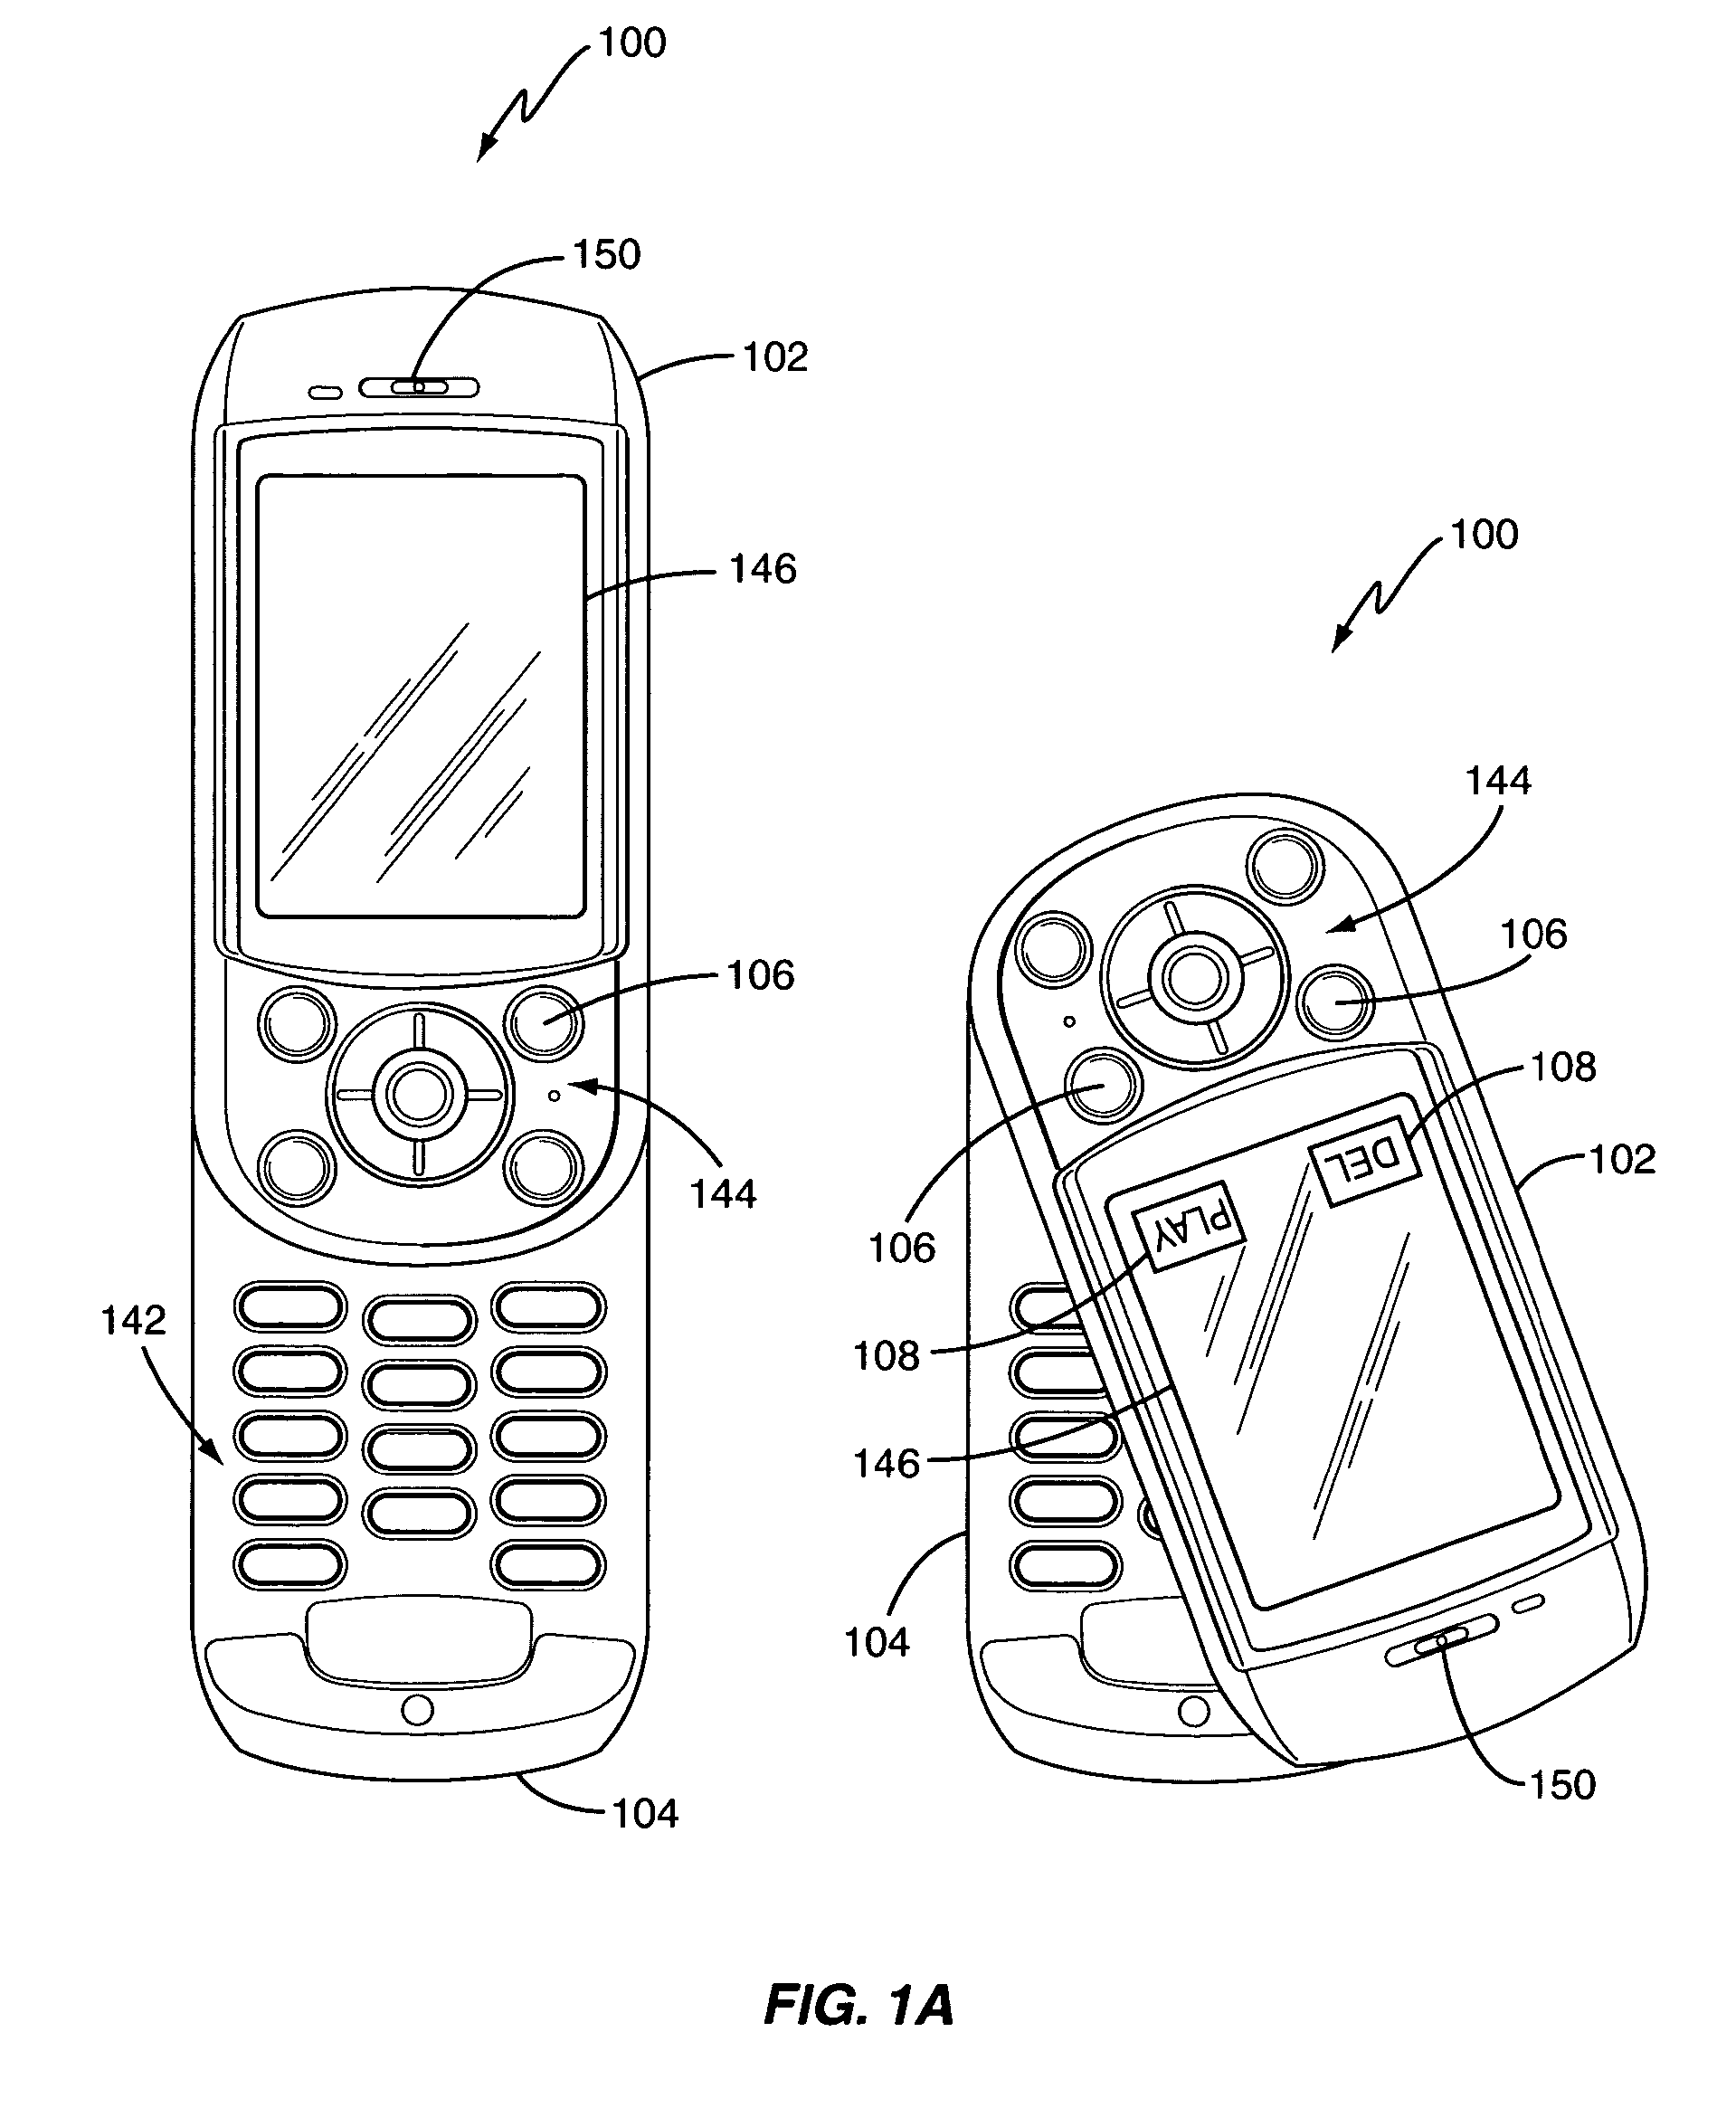 Closed mode user interface for wireless communication devices